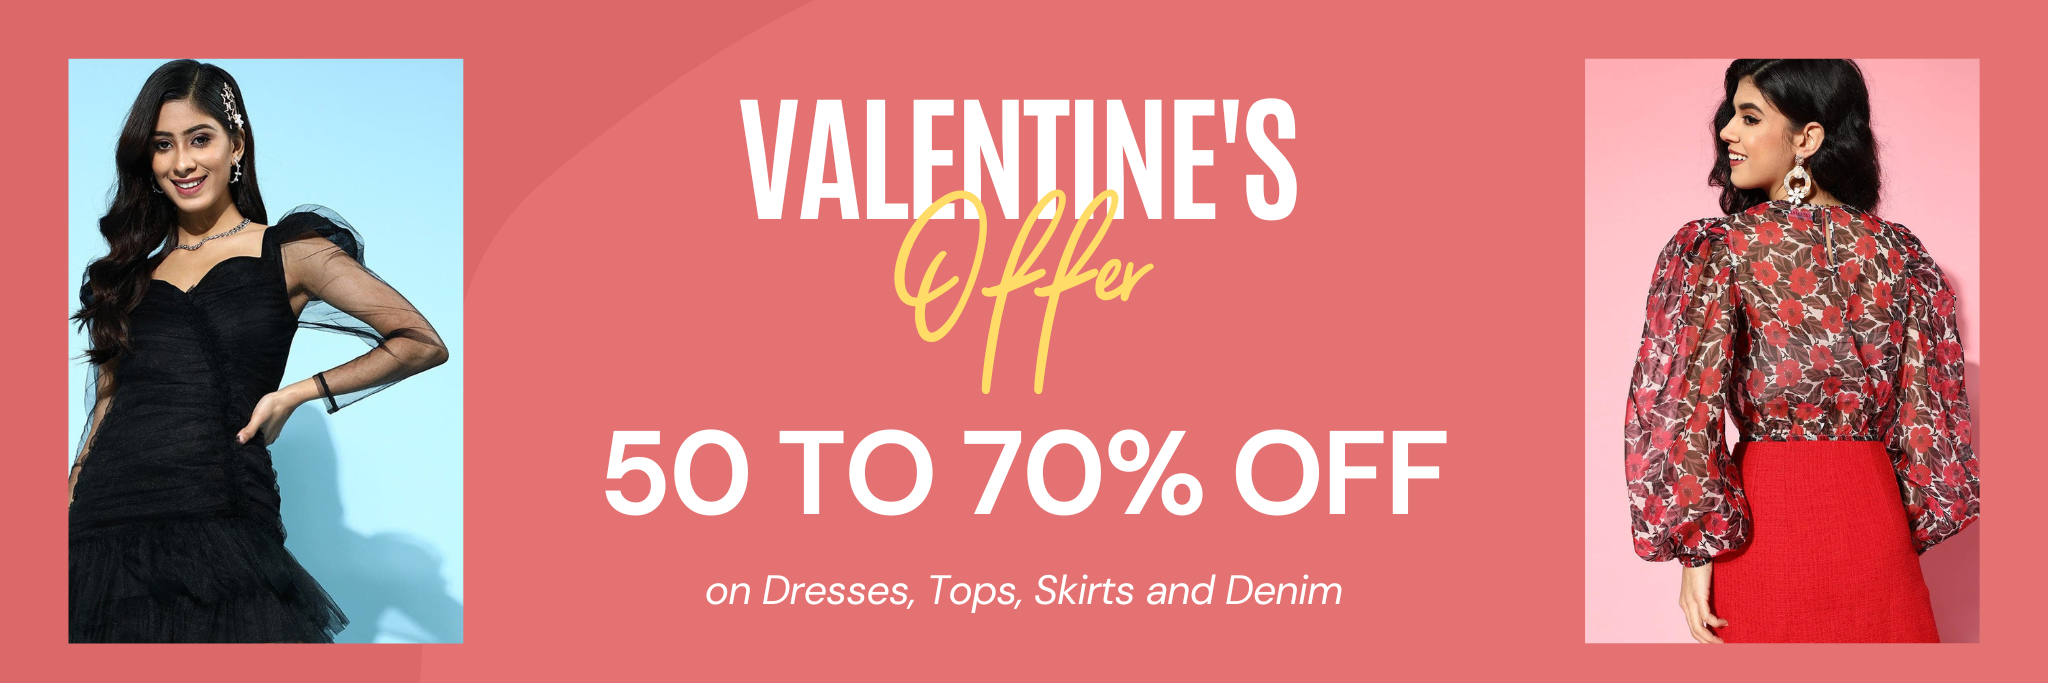 50% to 70% OFF